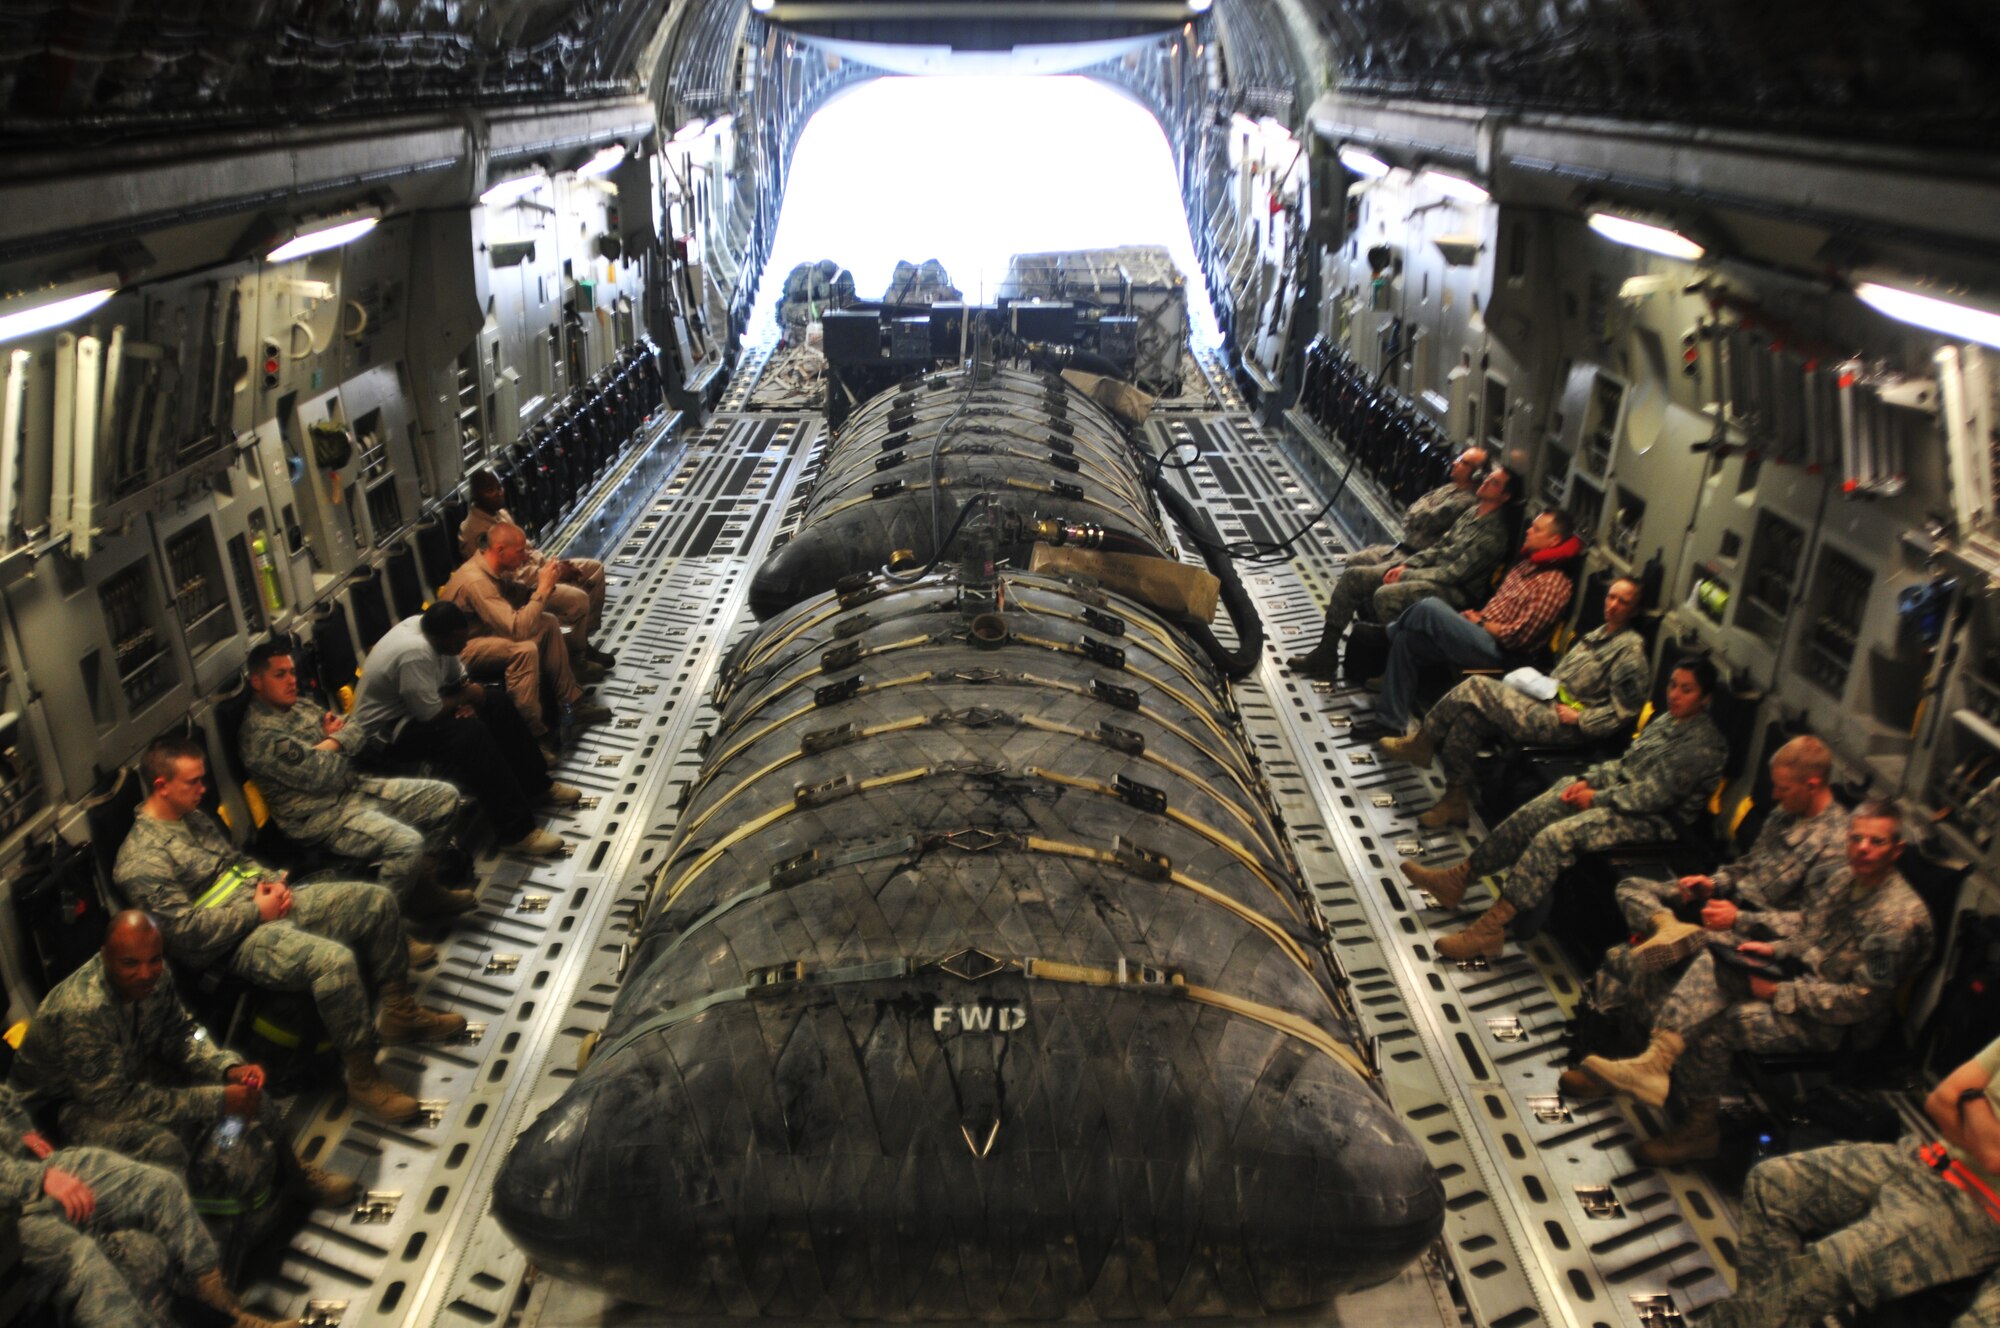 U.S. servicemembers from various branches hitch a ride on an aircraft carrying two fuel bladders filled with aviation gasoline Oct. 21, 2011, at an undisclosed location in Southwest Asia. The fuel bladders are self-sealing and can withstand small arms fire. (U.S. Air Force photo/Senior Airman Eric Summers Jr.)